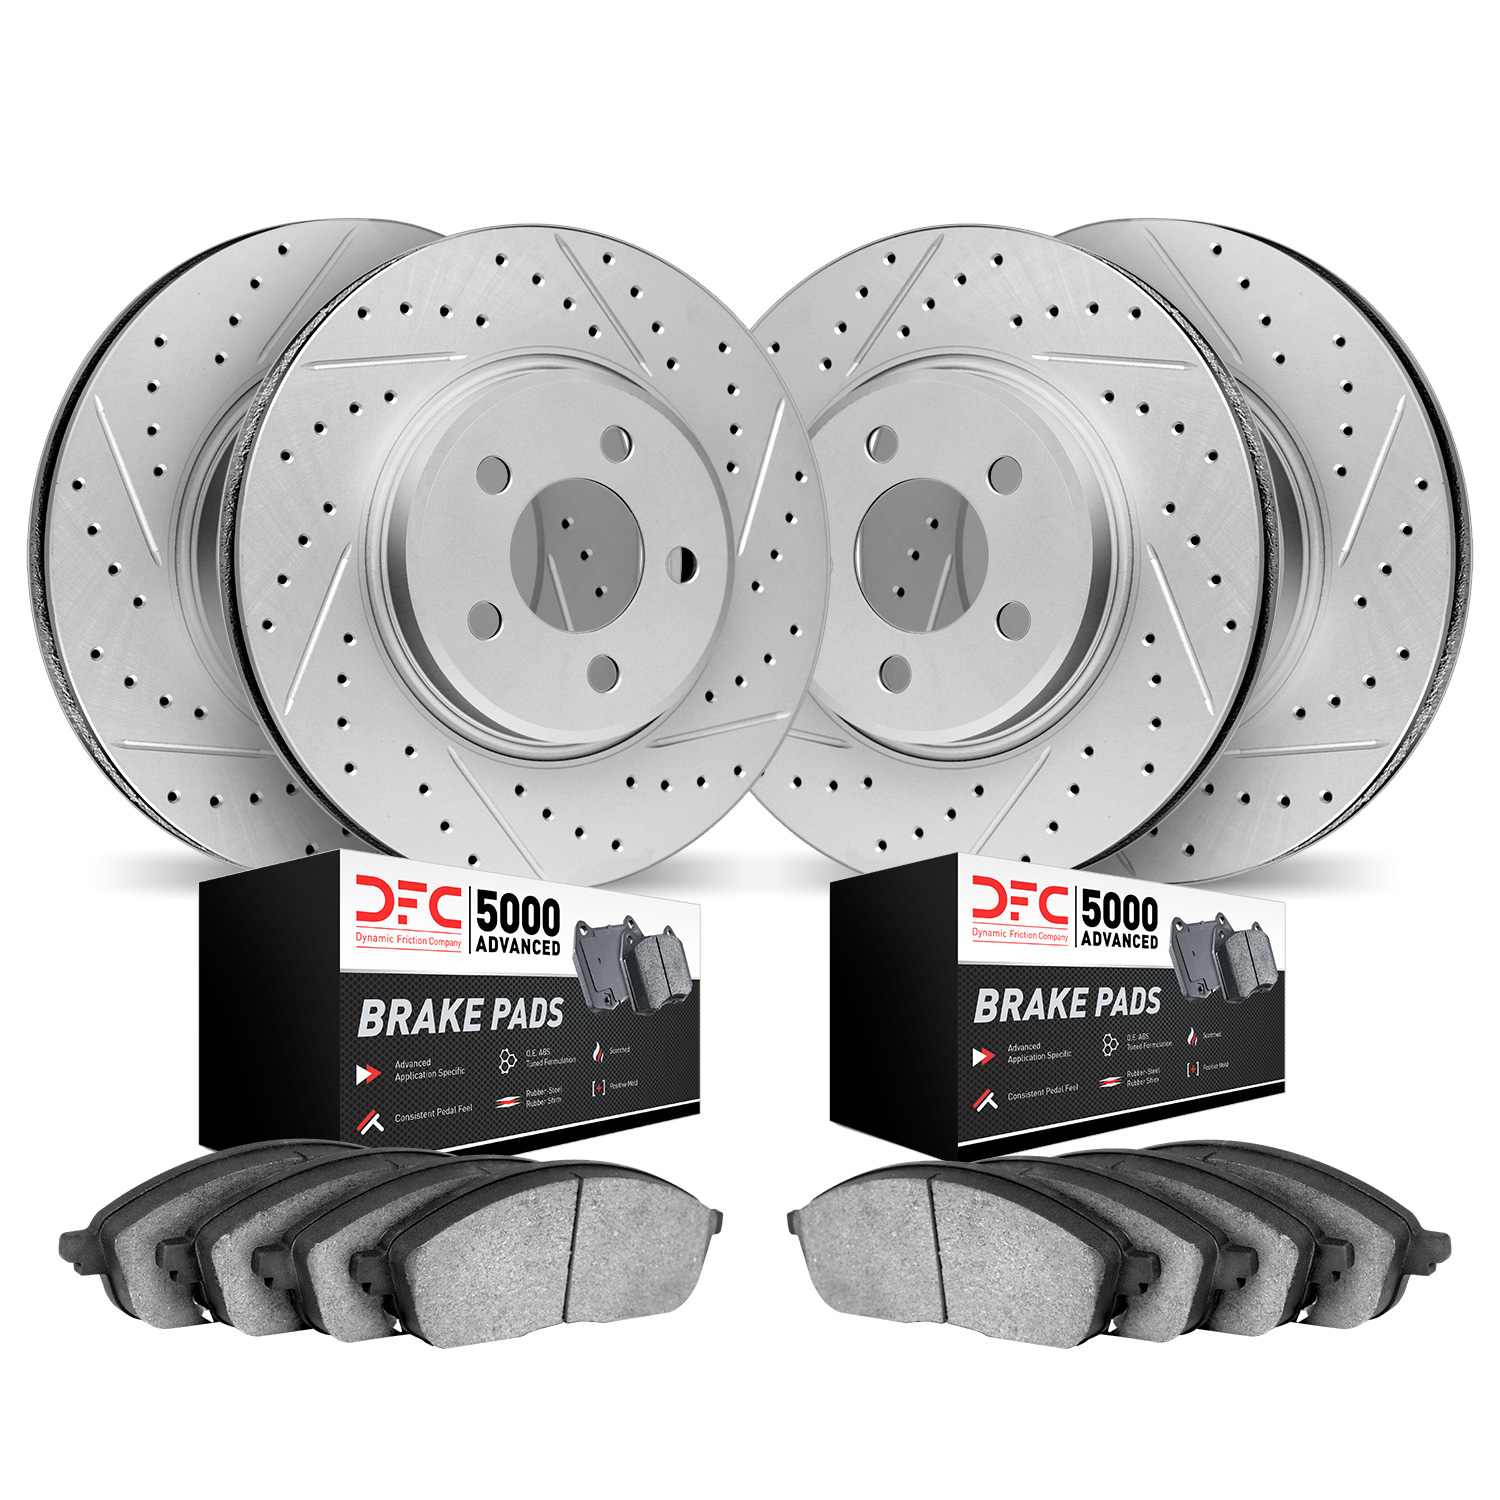 2504-40110 Geoperformance Drilled/Slotted Rotors w/5000 Advanced Brake Pads Kit, 2014-2021 Mopar, Position: Front and Rear